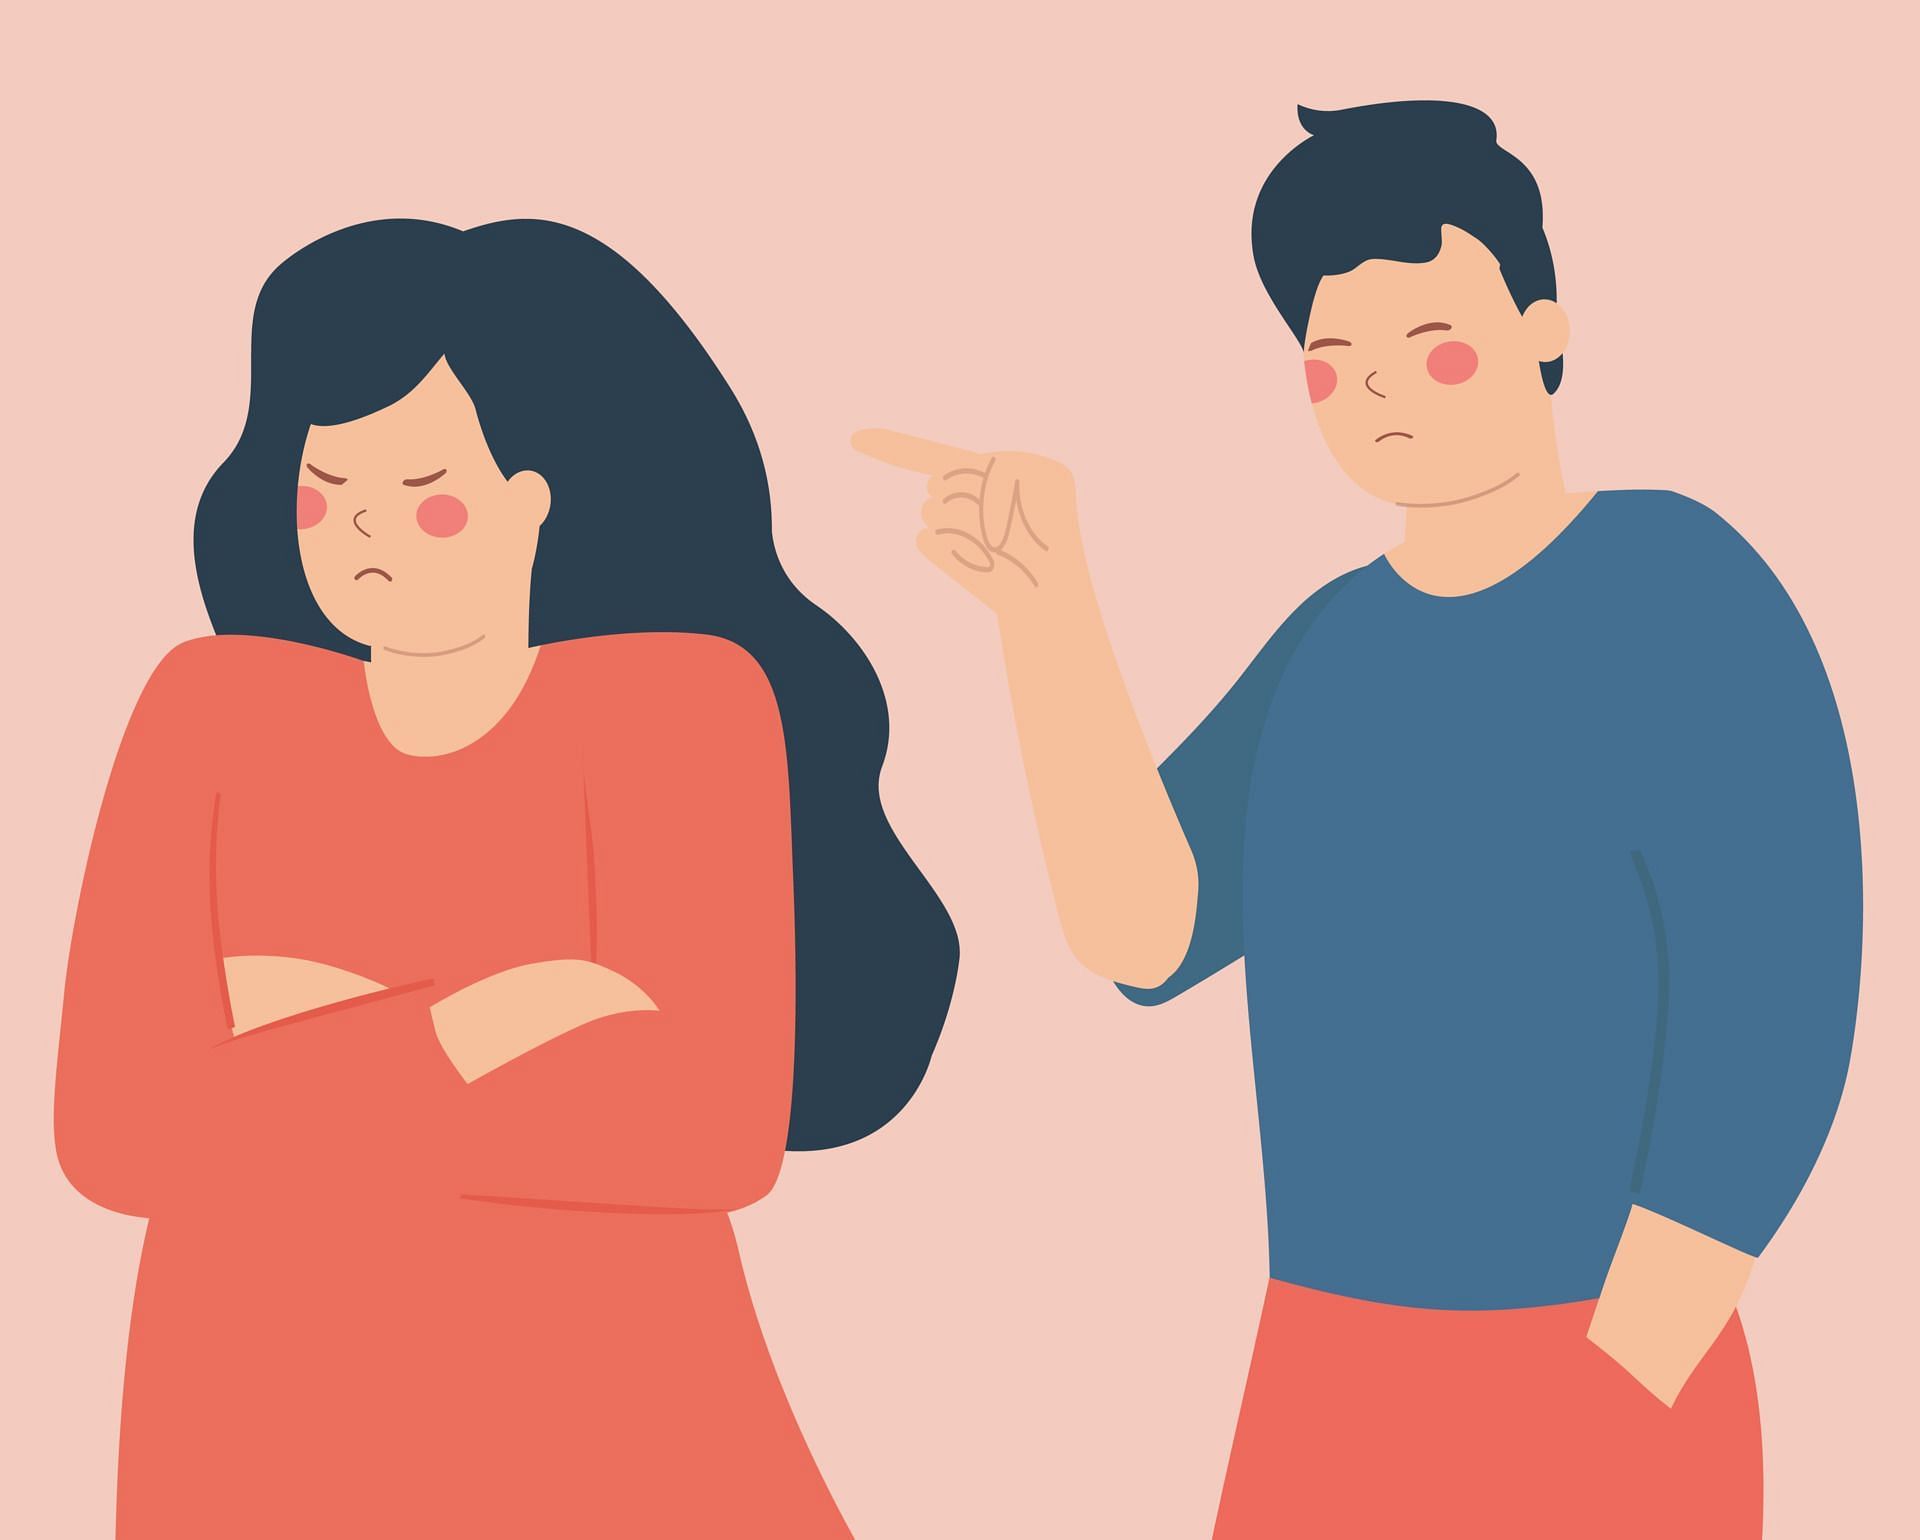 Emotionally avoidant partners are least likely to ask for help. (Image via Vecteezy/Sa Lim)